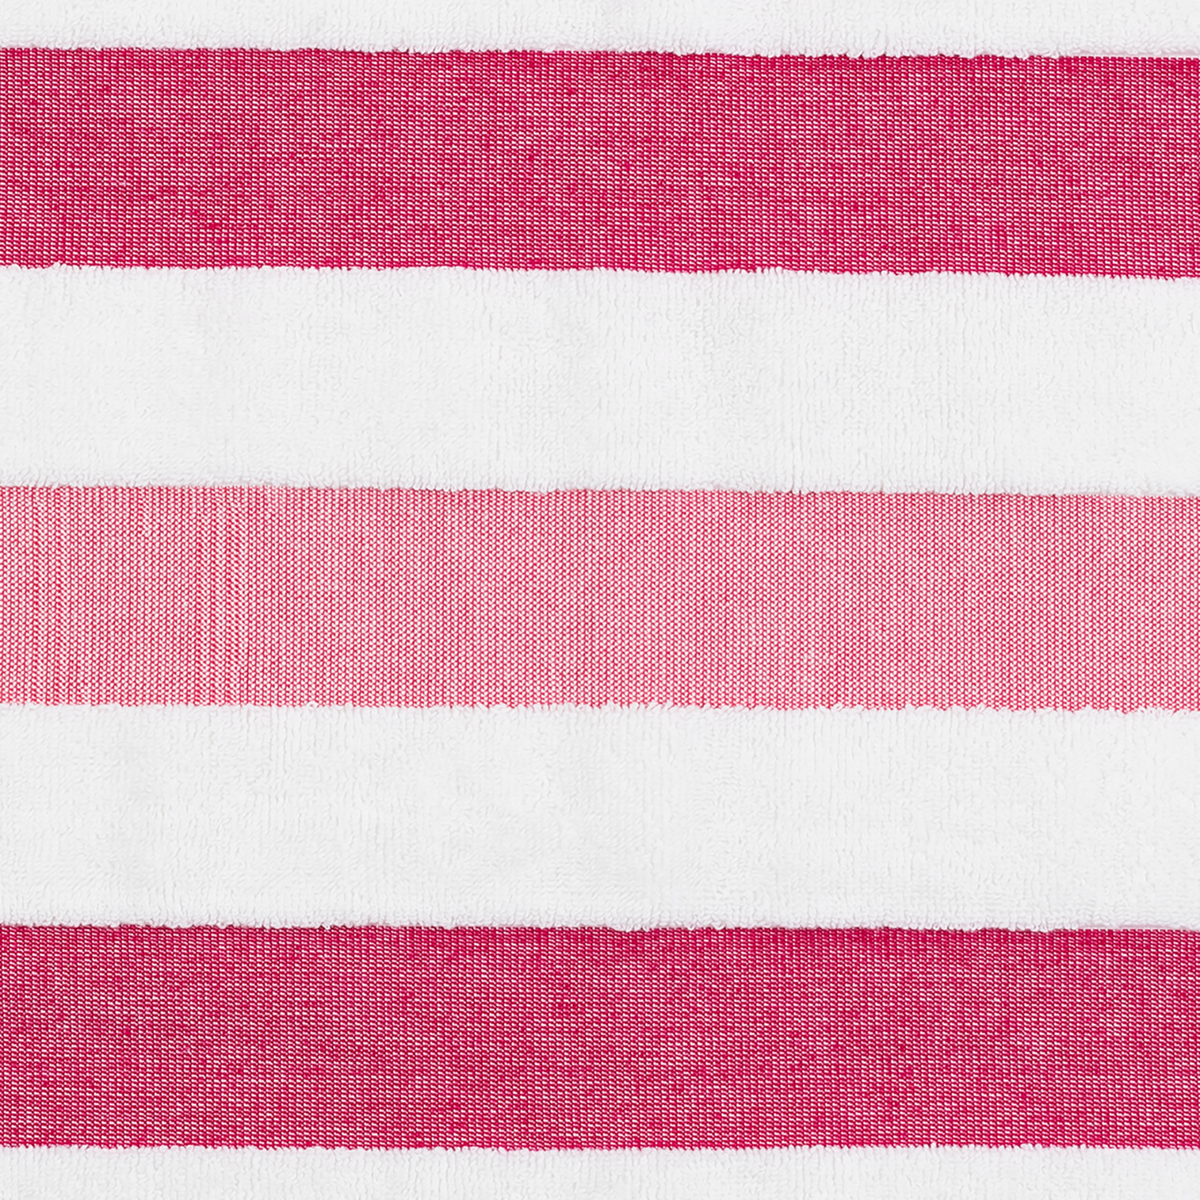 Swatch Sample of Matouk Amado Pool and Beach Towels in Candy Stripe Color